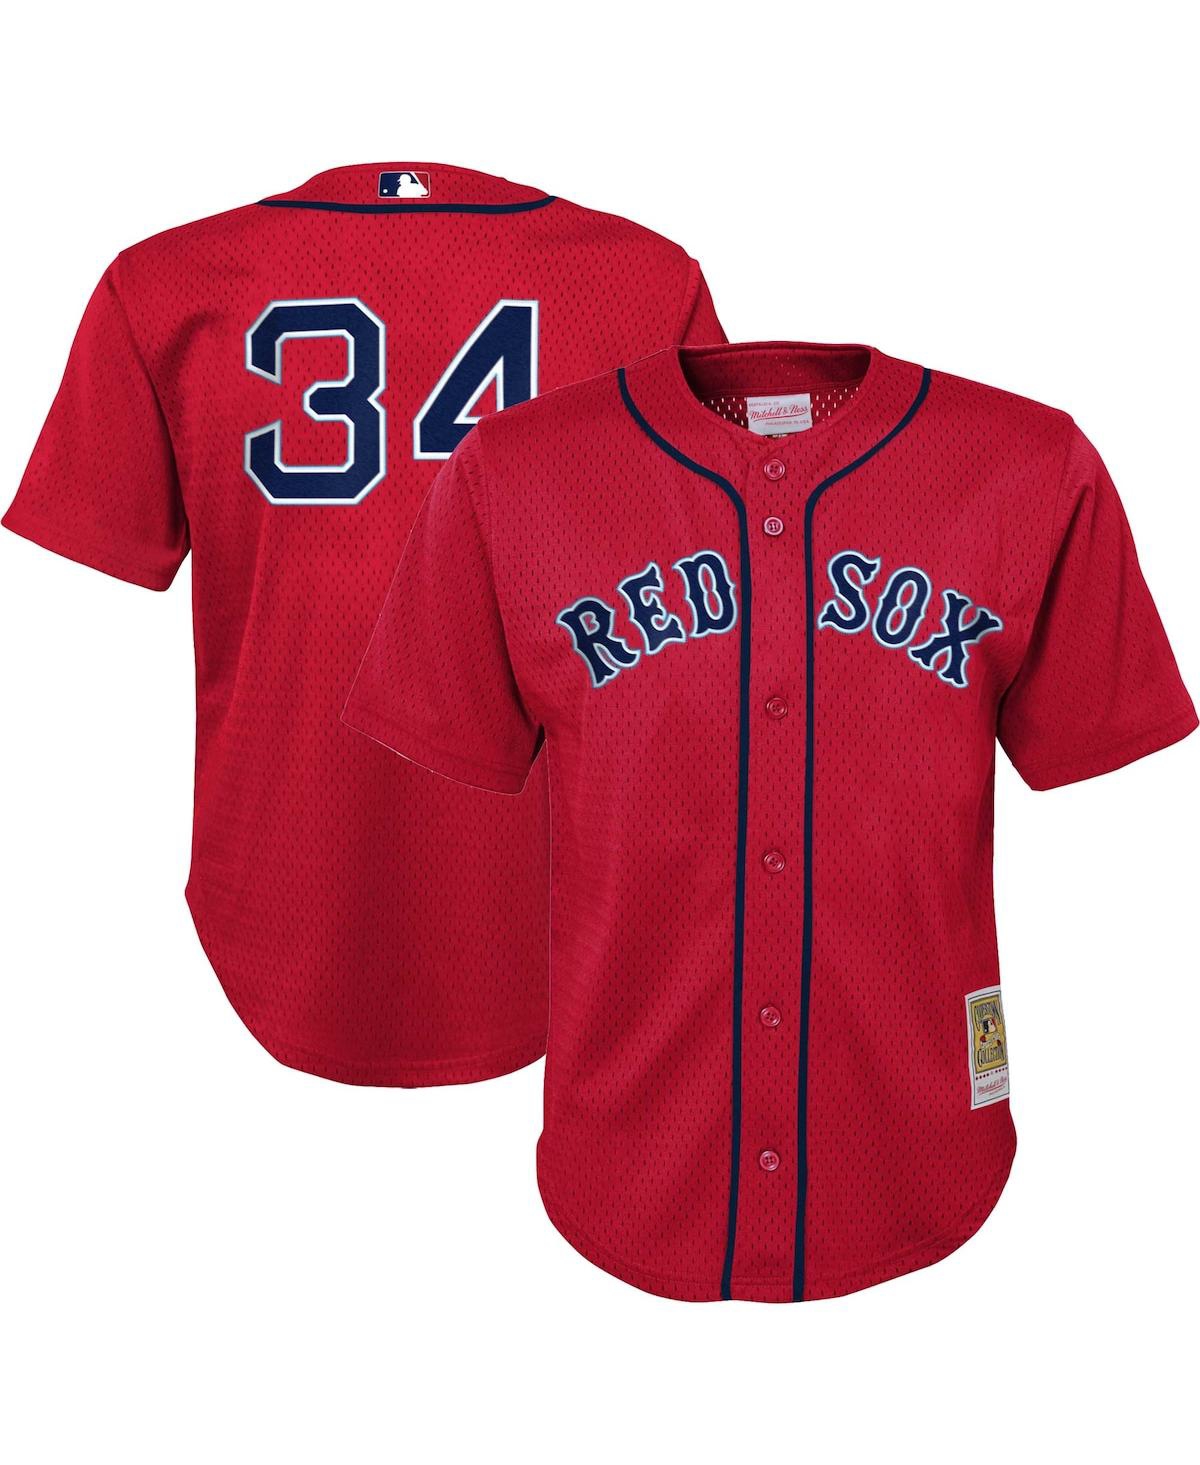 Mitchell Ness Preschool David Ortiz Red Boston Red Sox Cooperstown CollectionÂ Mesh Batting Practice Jersey - Red